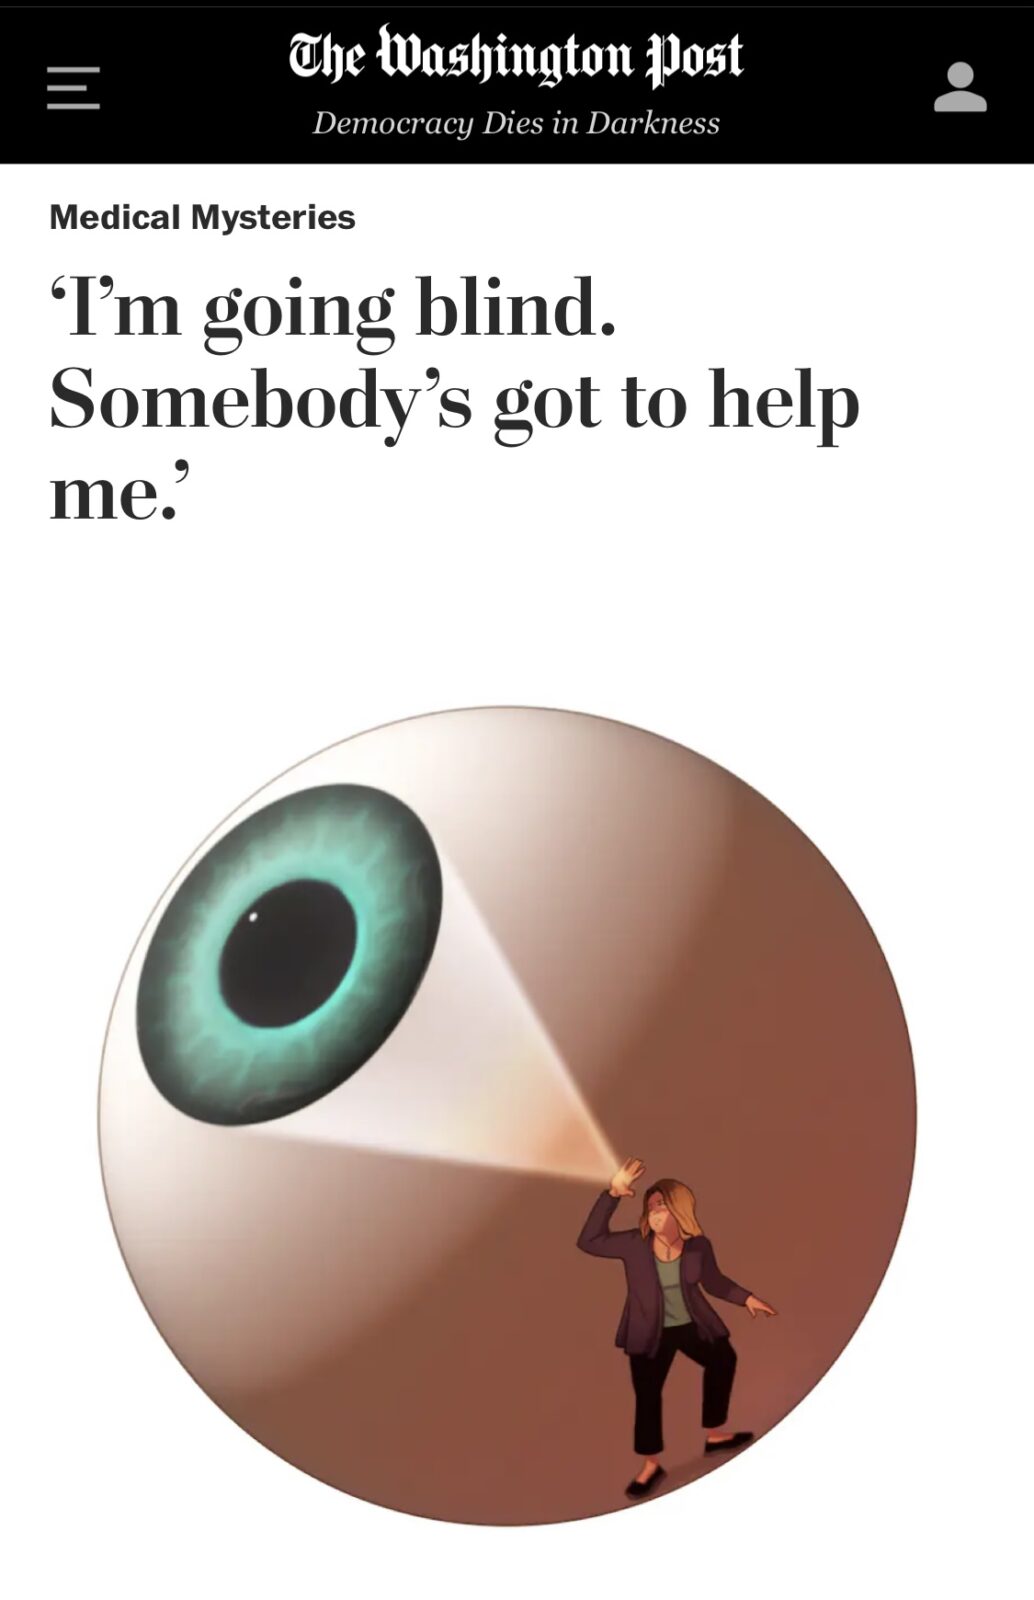 Im Going Blind. Sombodys got to help me. Washington Post Medical Mysteries : Eyeball with a woman shining a light over the iris